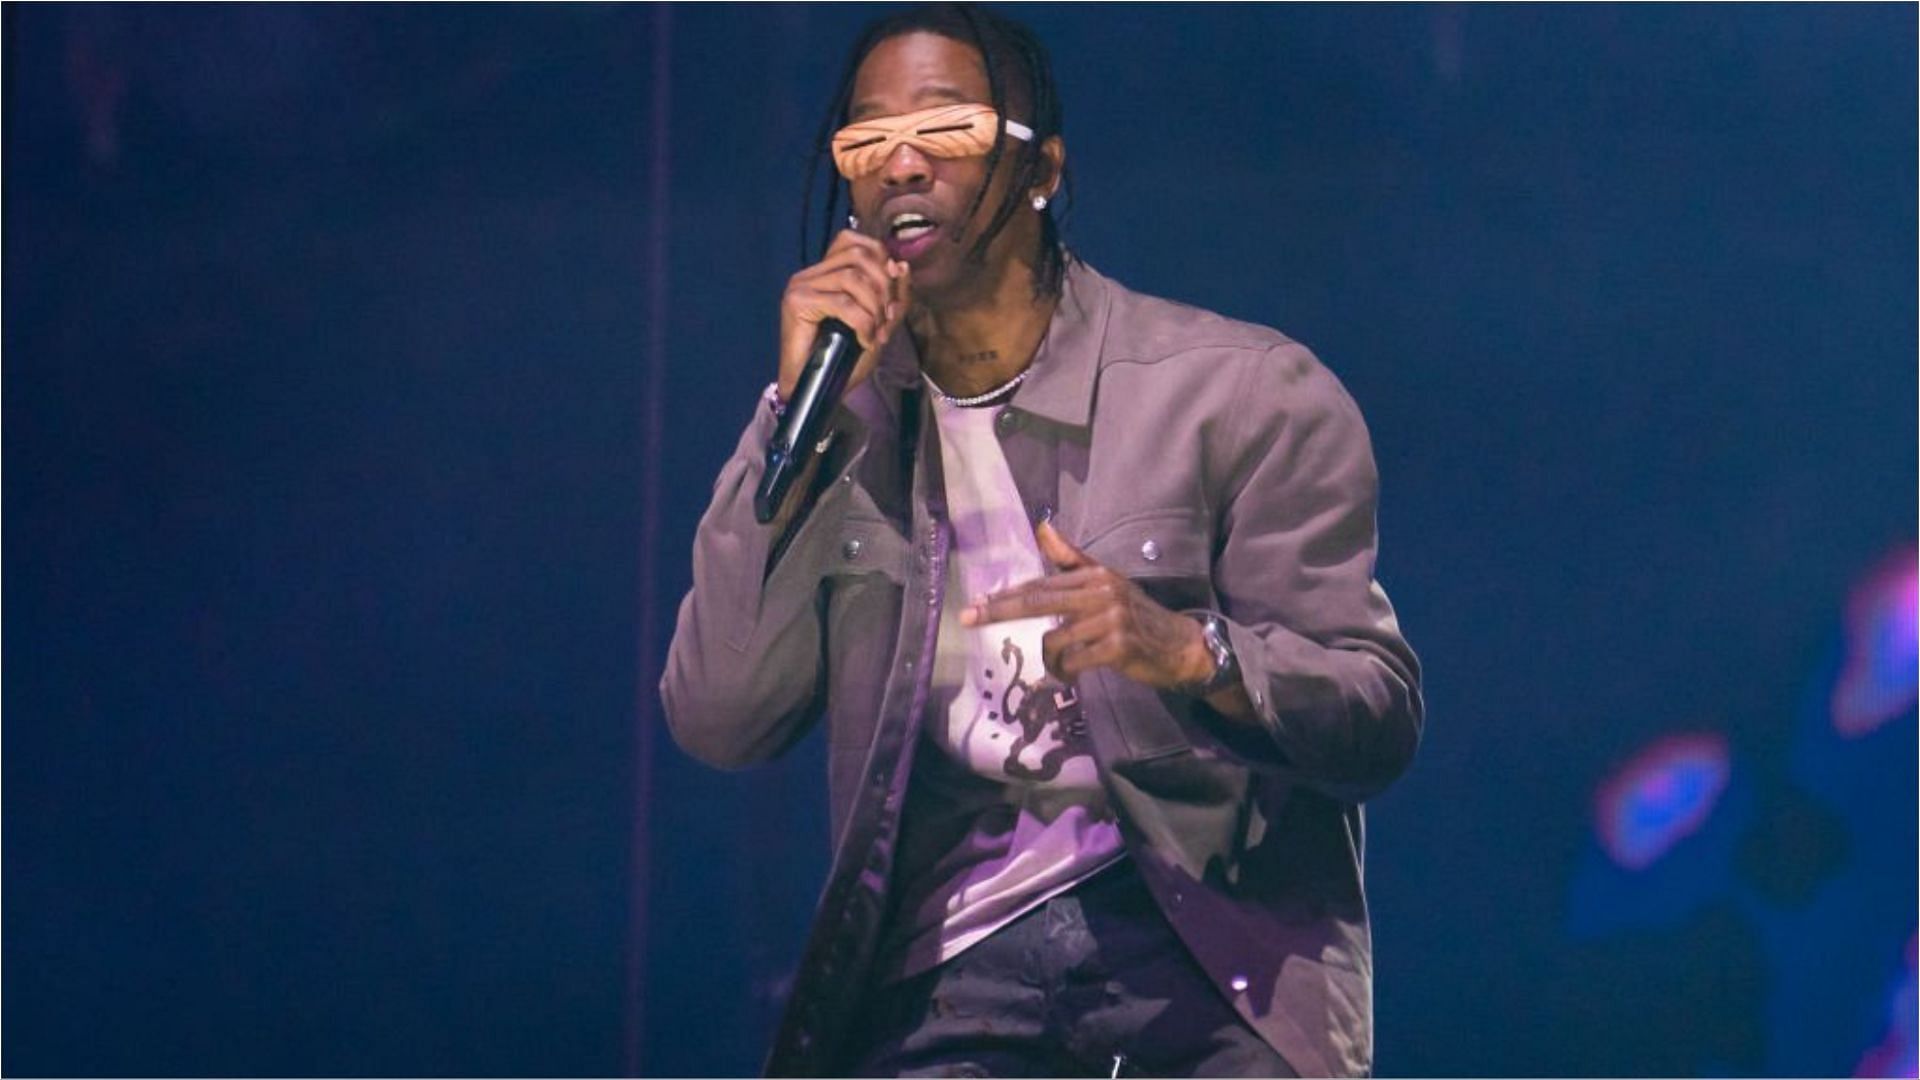 Lawsuits were filed against Travis Scott following the incident at the Astroworld Music Festival (Image via Lorne Thomson/Getty Images)